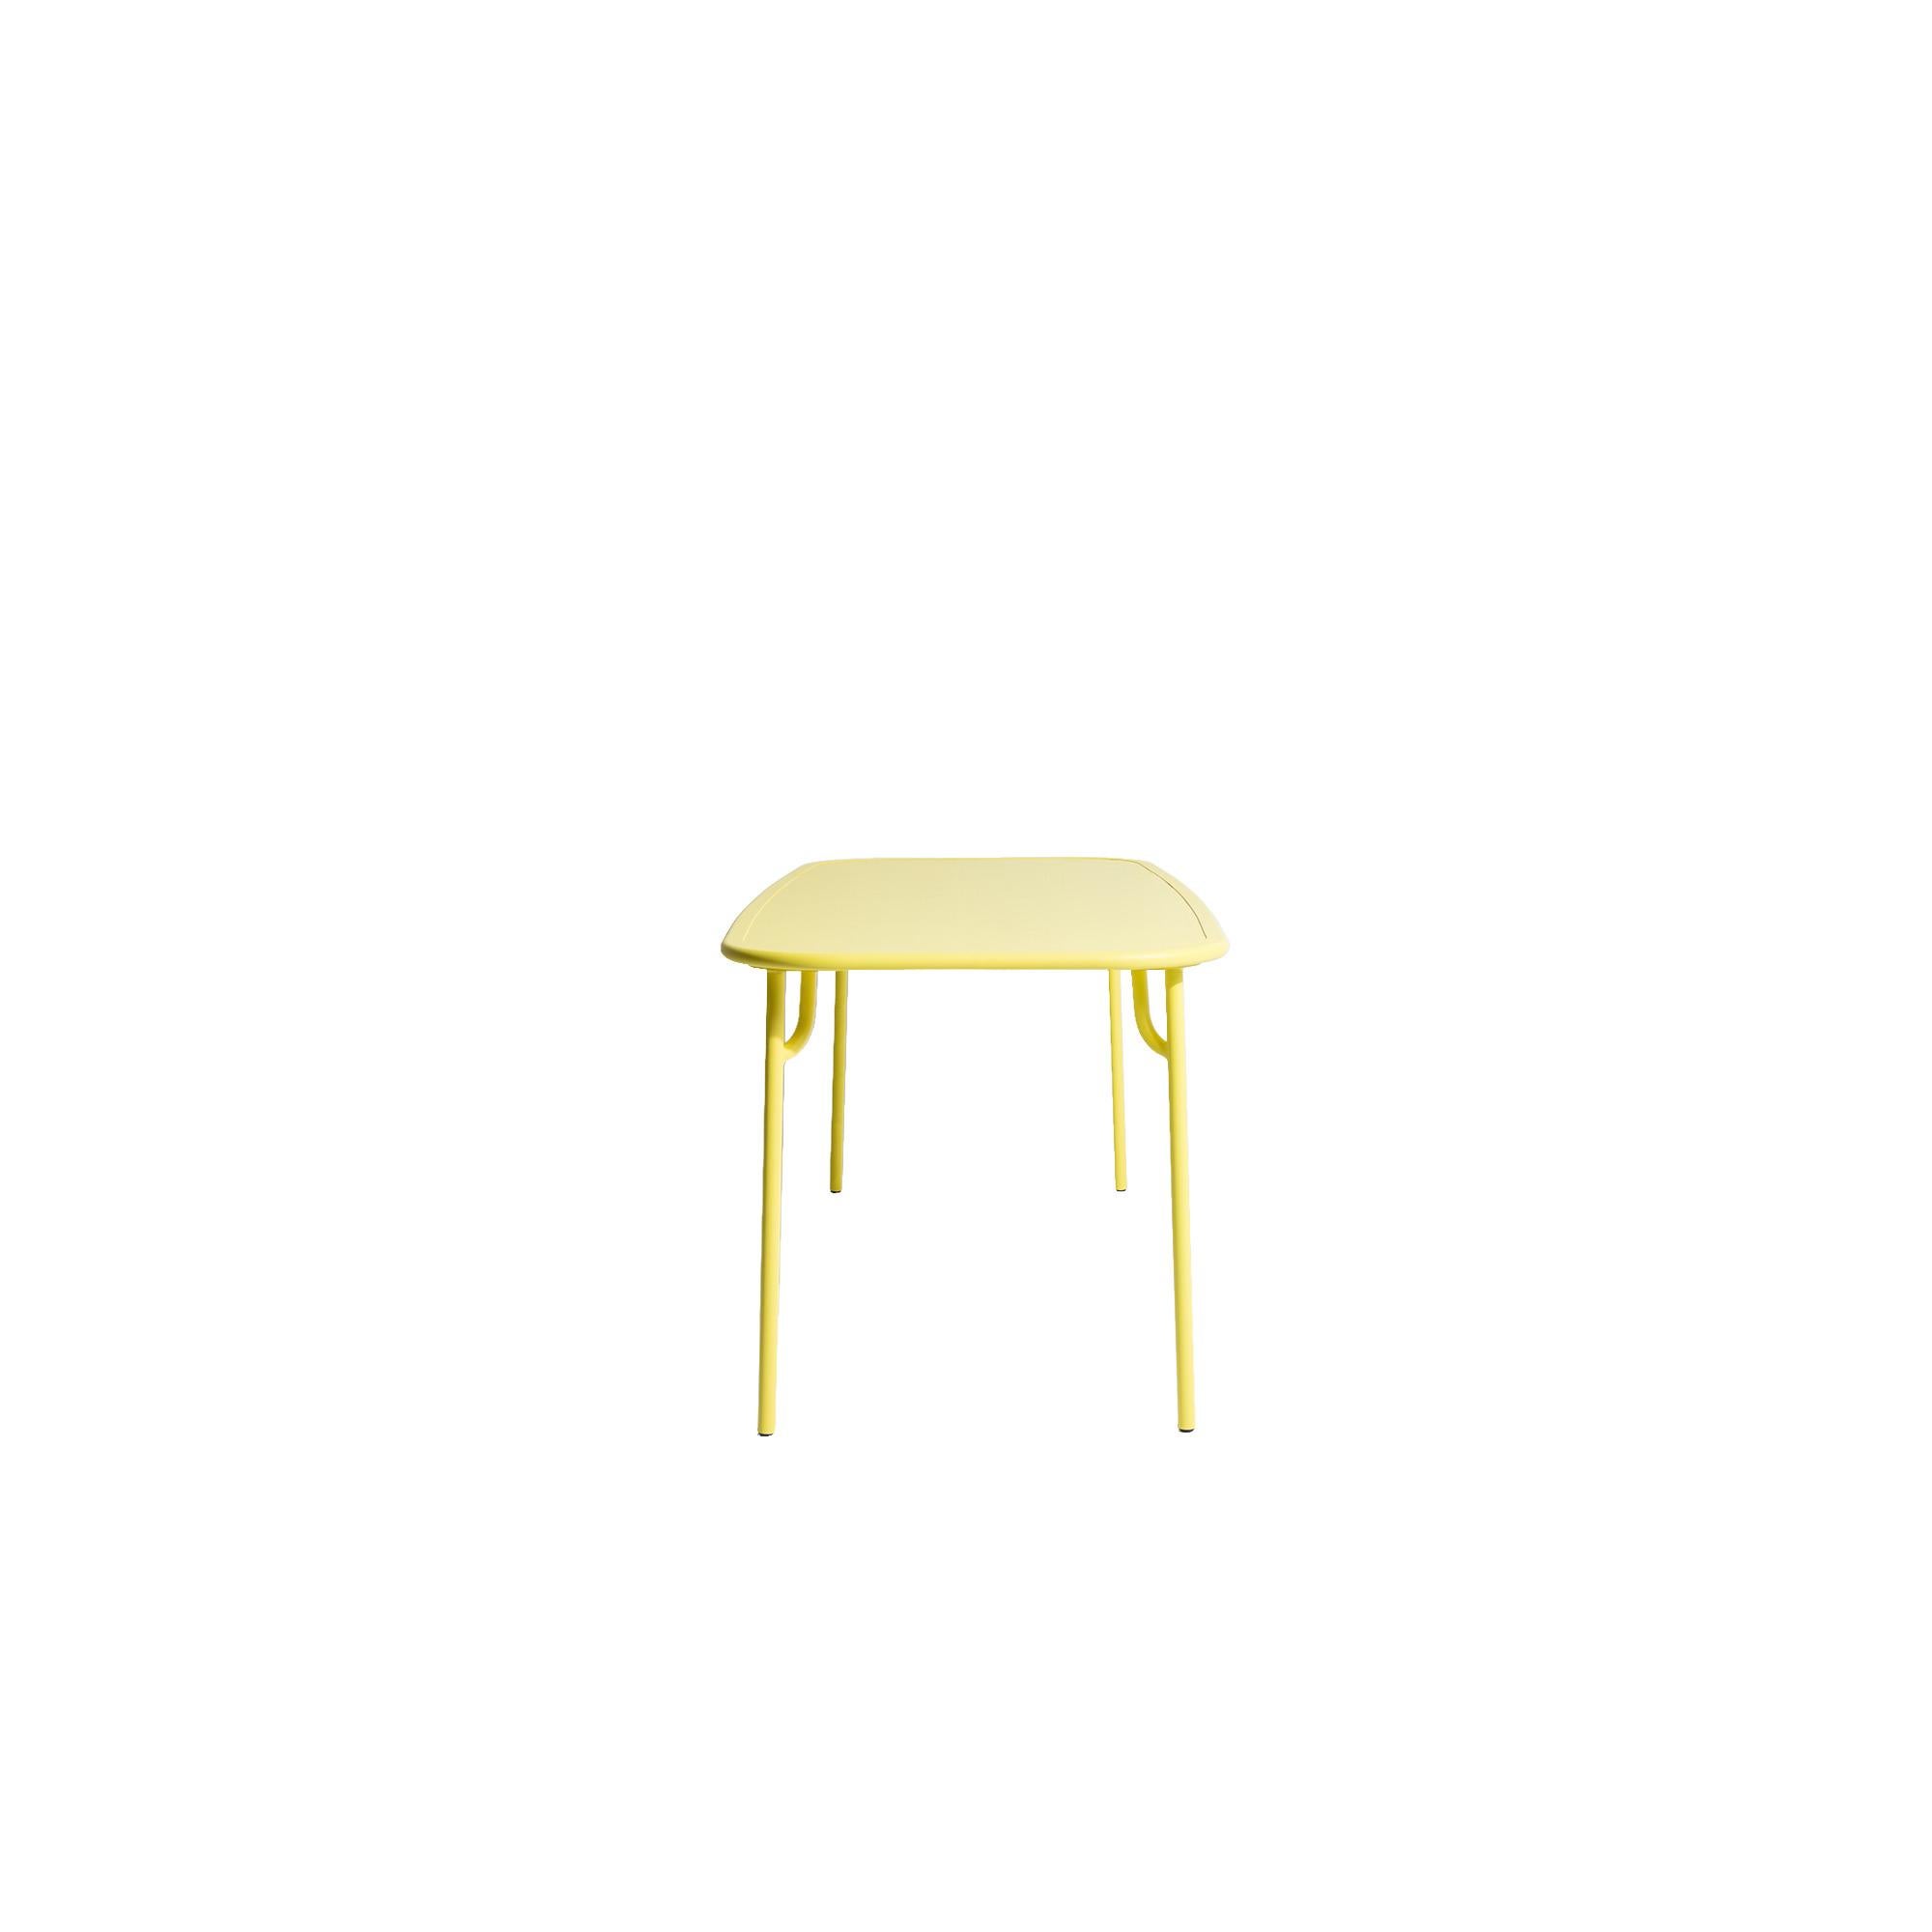 Chinese Petite Friture Week-End Medium Plain Rectangular Dining Table in Yellow, 2017 For Sale